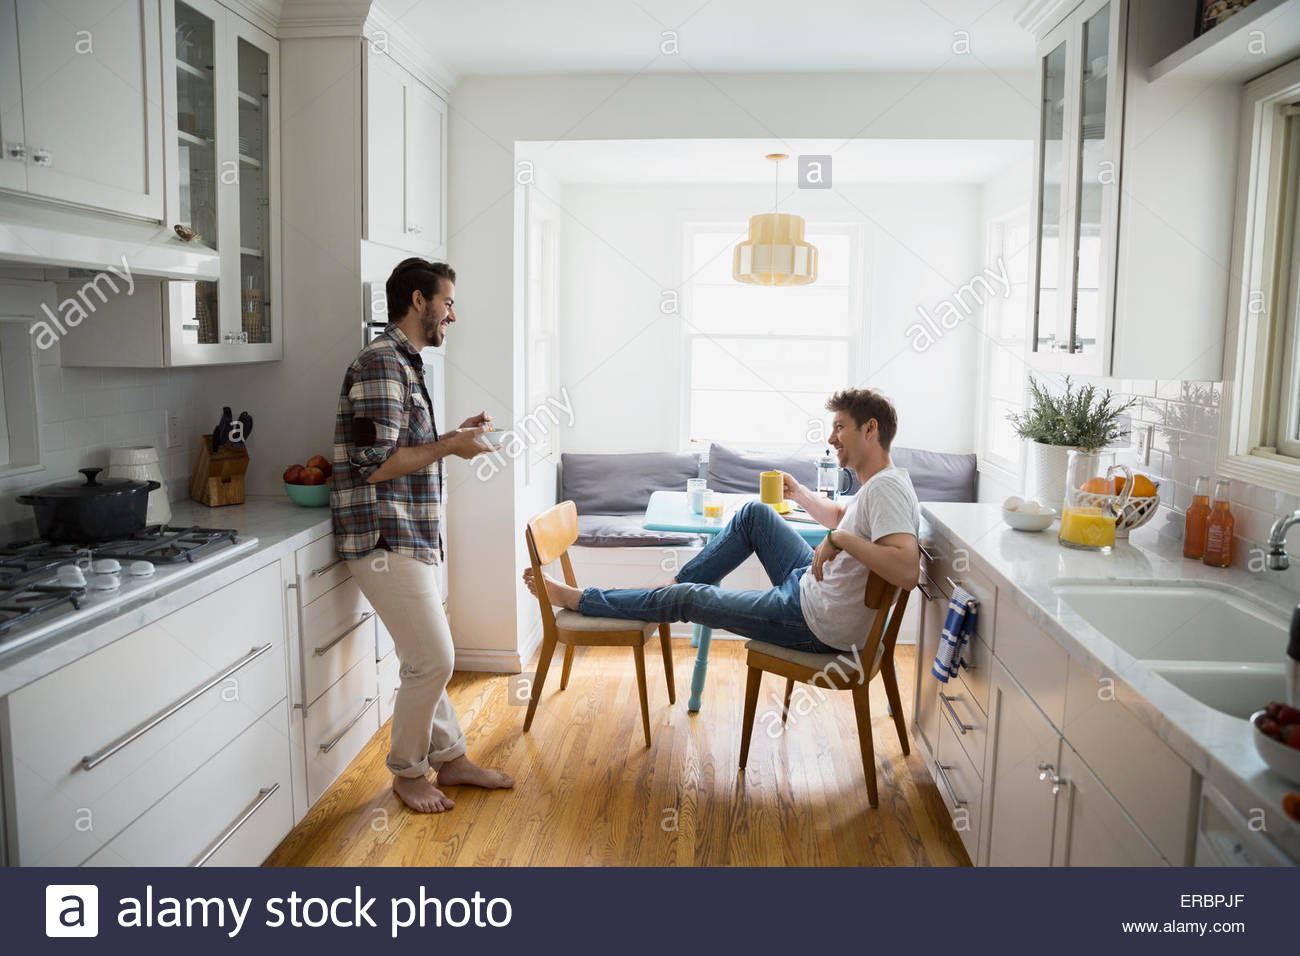 Homosexual couple talking and eating breakfast in kitchen Stock Photo